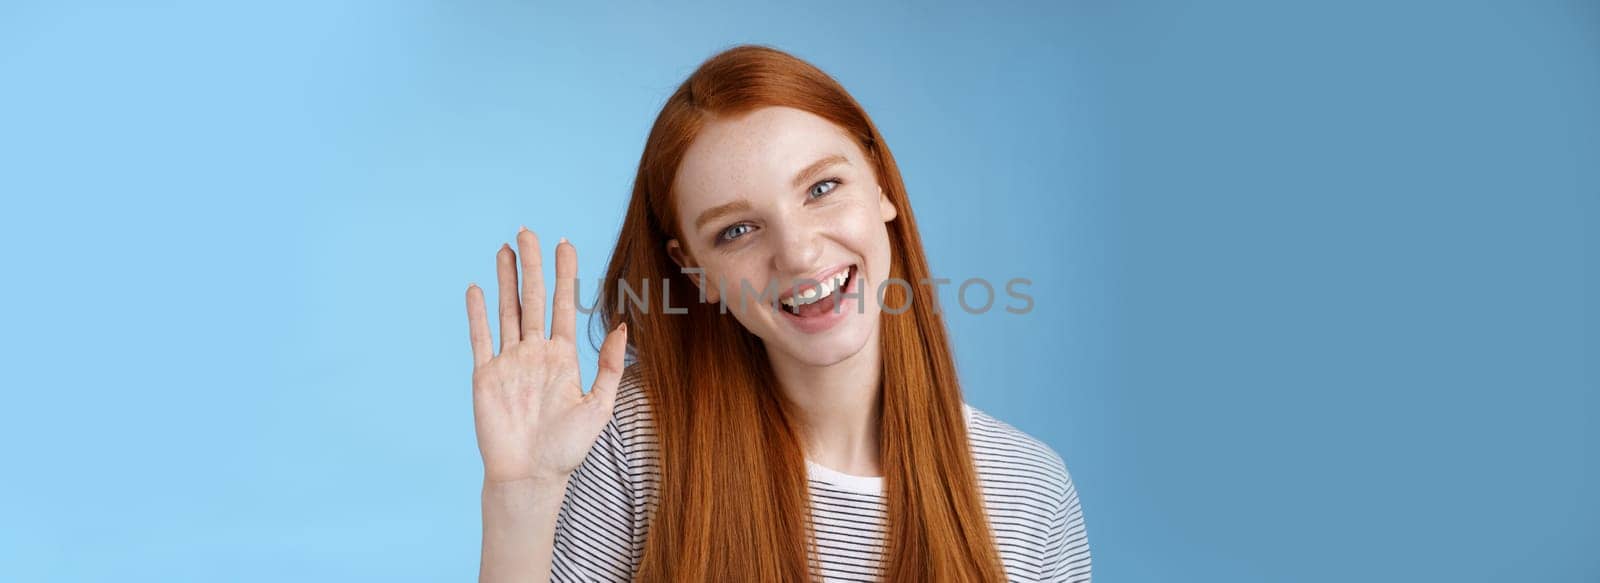 Attractive confident redhead sassy girl pure clean skin blue eyes tilting head cheerfully waving hand hello hi gesture greeting you look camera friendly welcoming friend, standing studio background.